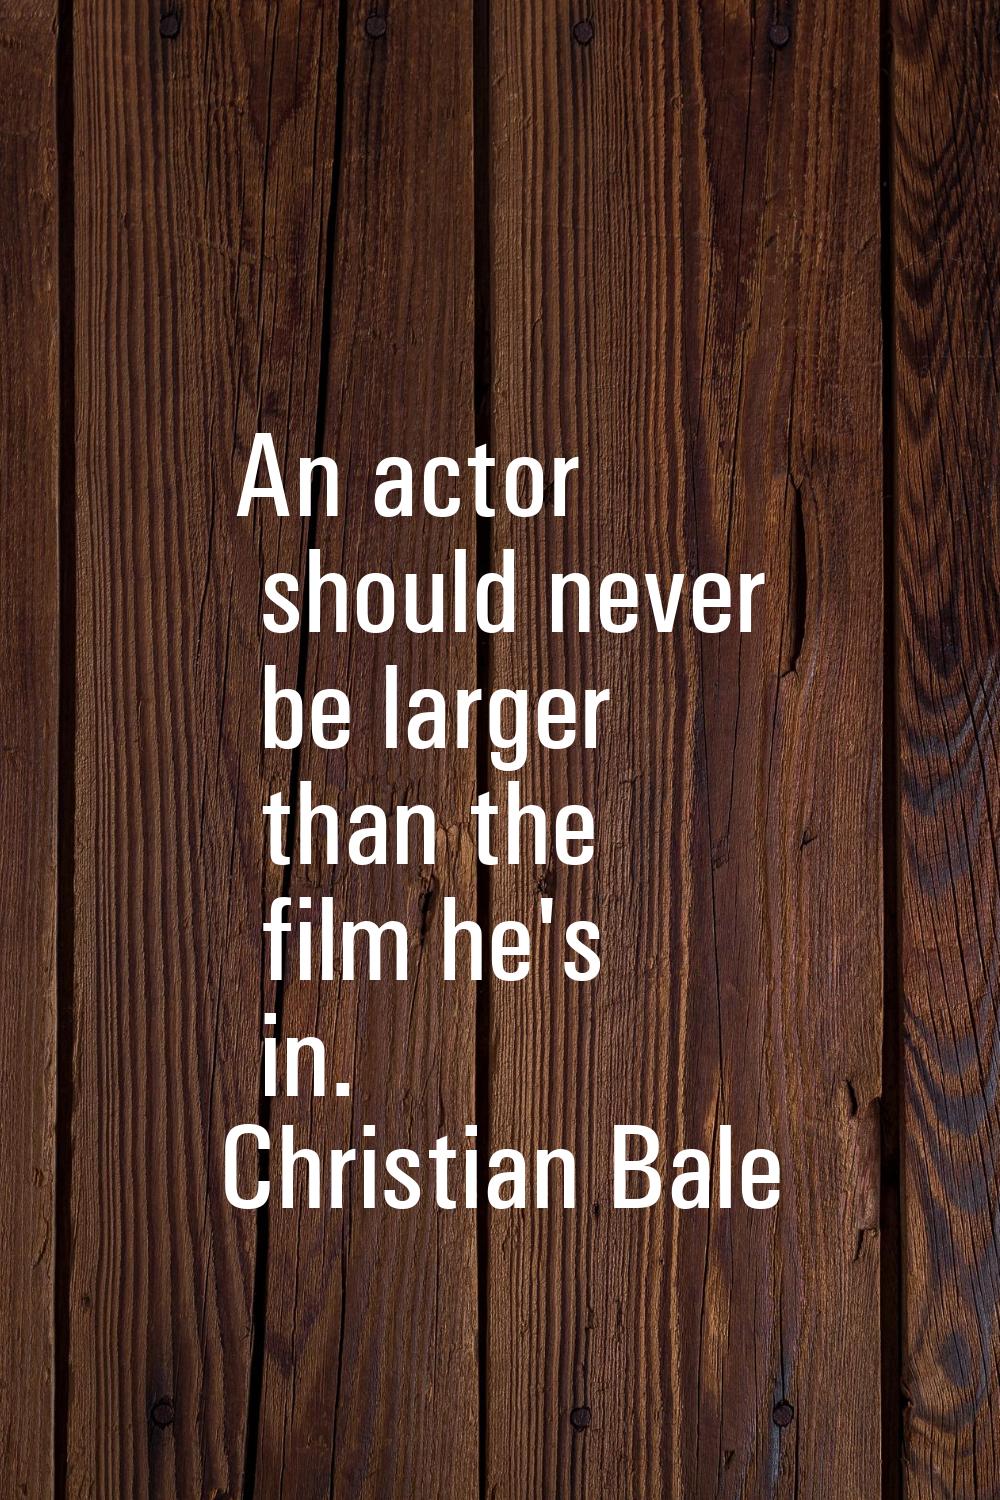 An actor should never be larger than the film he's in.